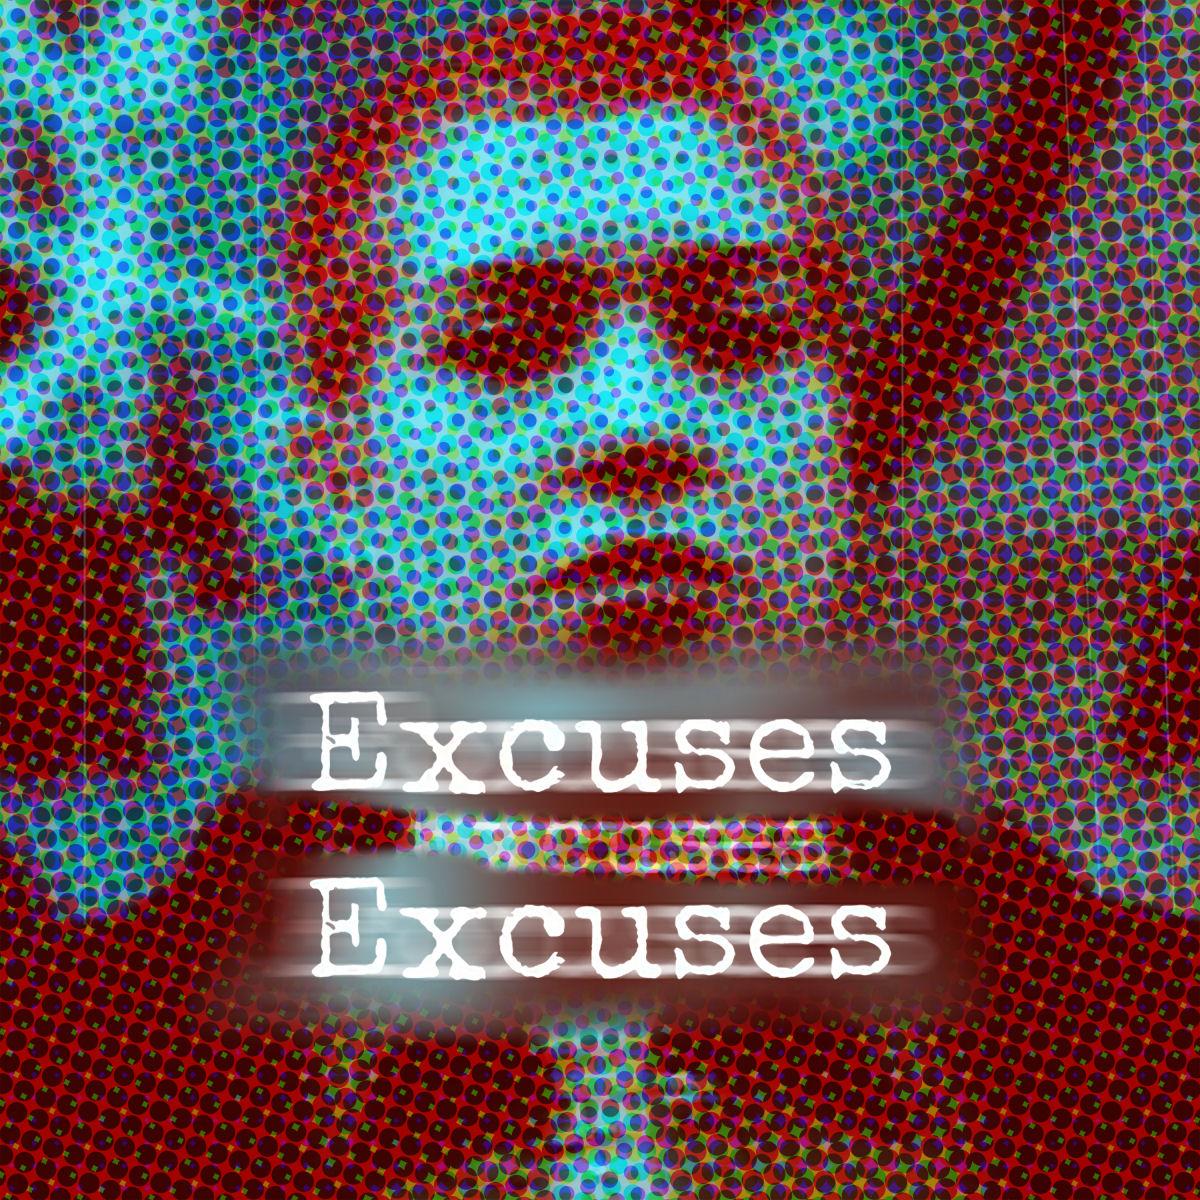 LISTEN: “Excuses Excuses” by The Trampoline Delay